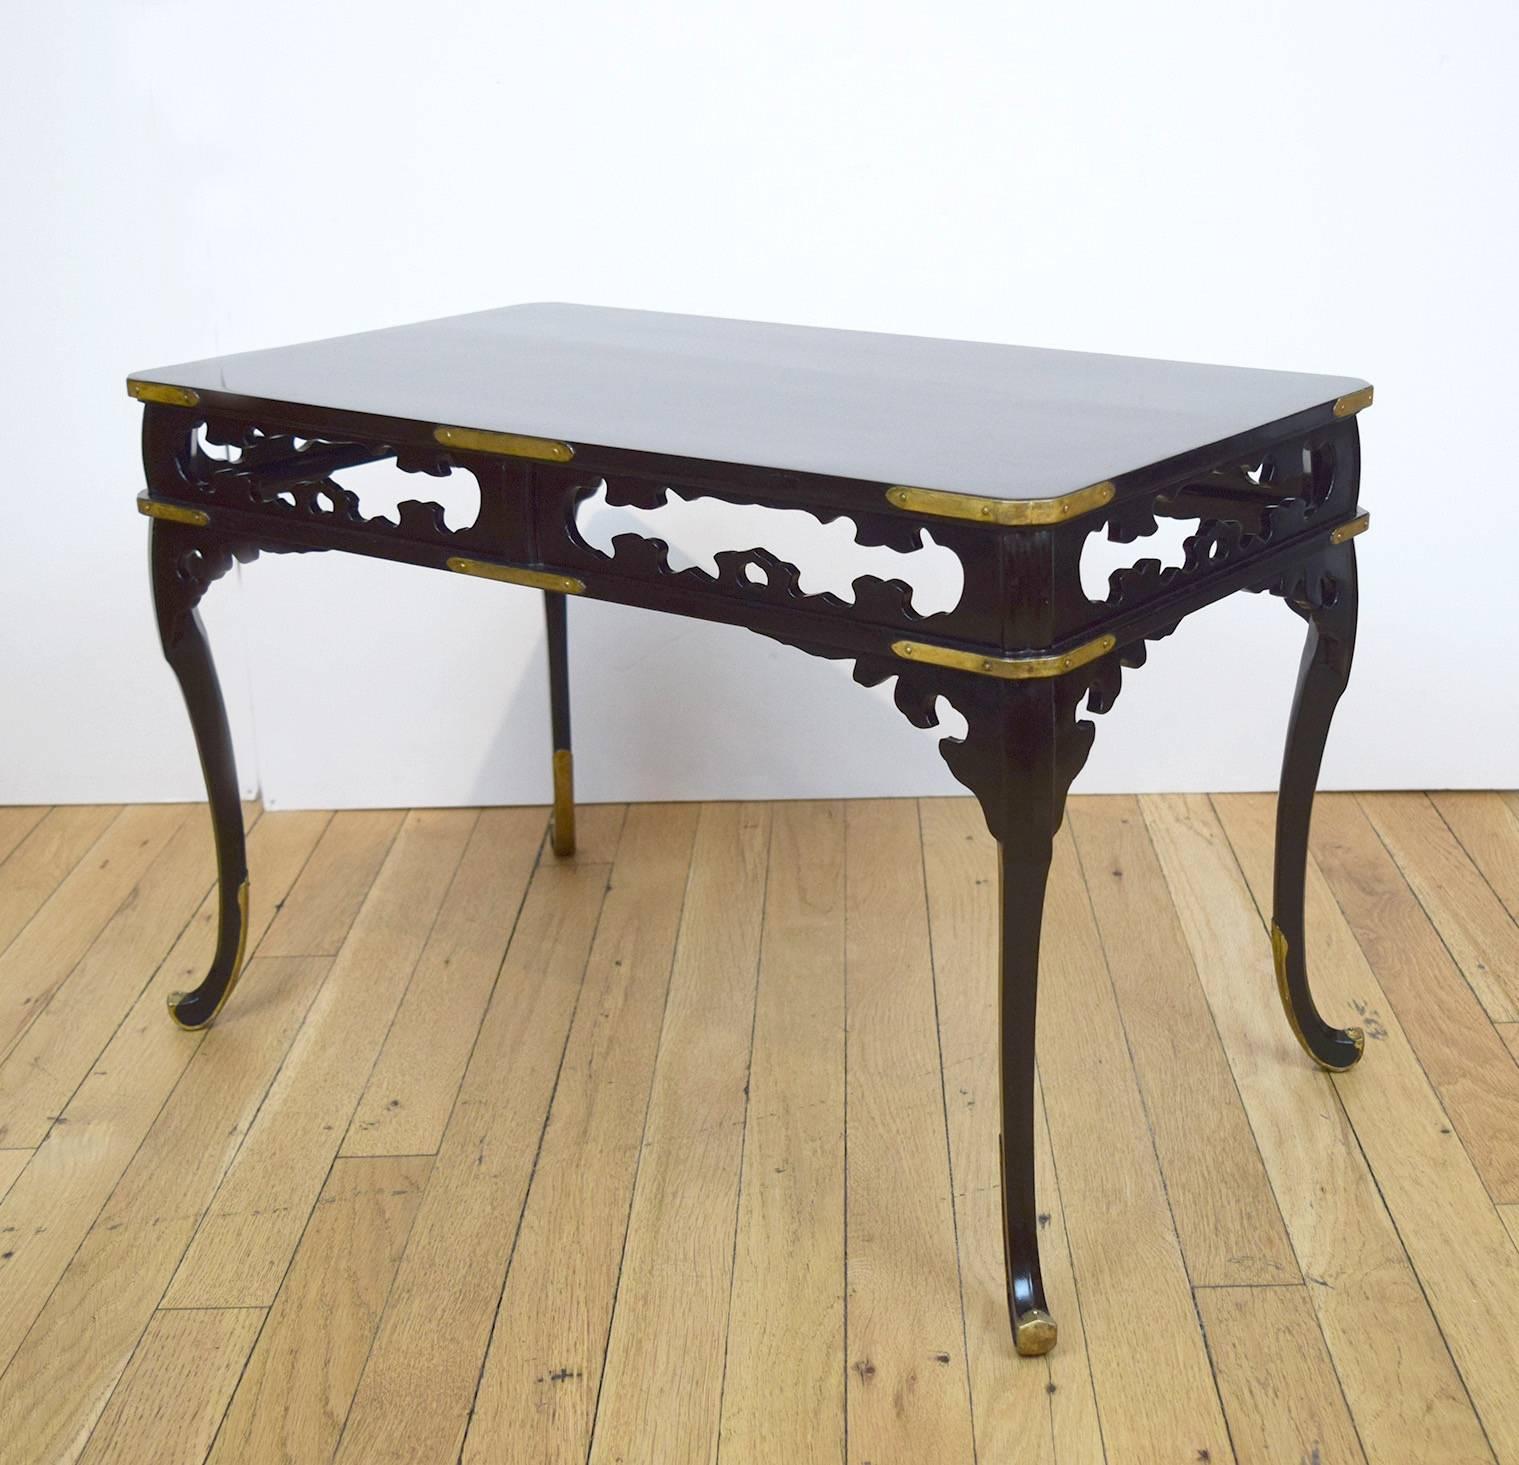 This exquisite, small, Japanese table was lacquered in a rich black, and mounted with gilt brasses. It probably dates to the early 20th century.